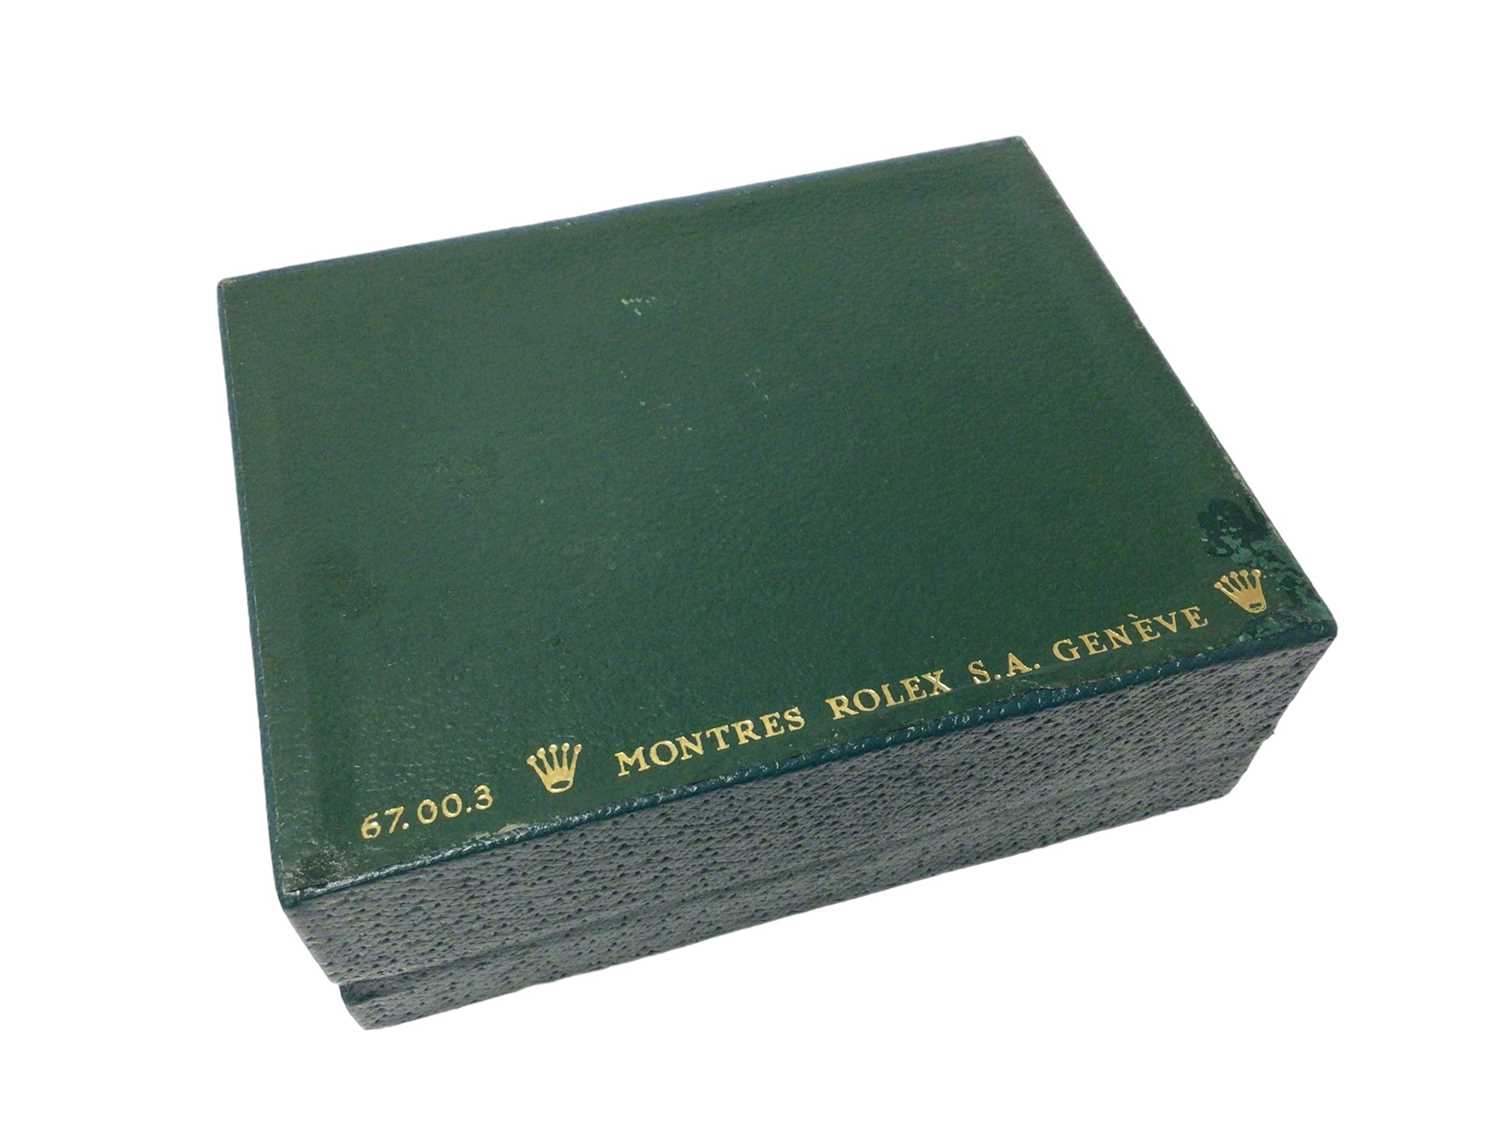 Rolex Oyster empty watch box and outer cardboard box - Image 5 of 7